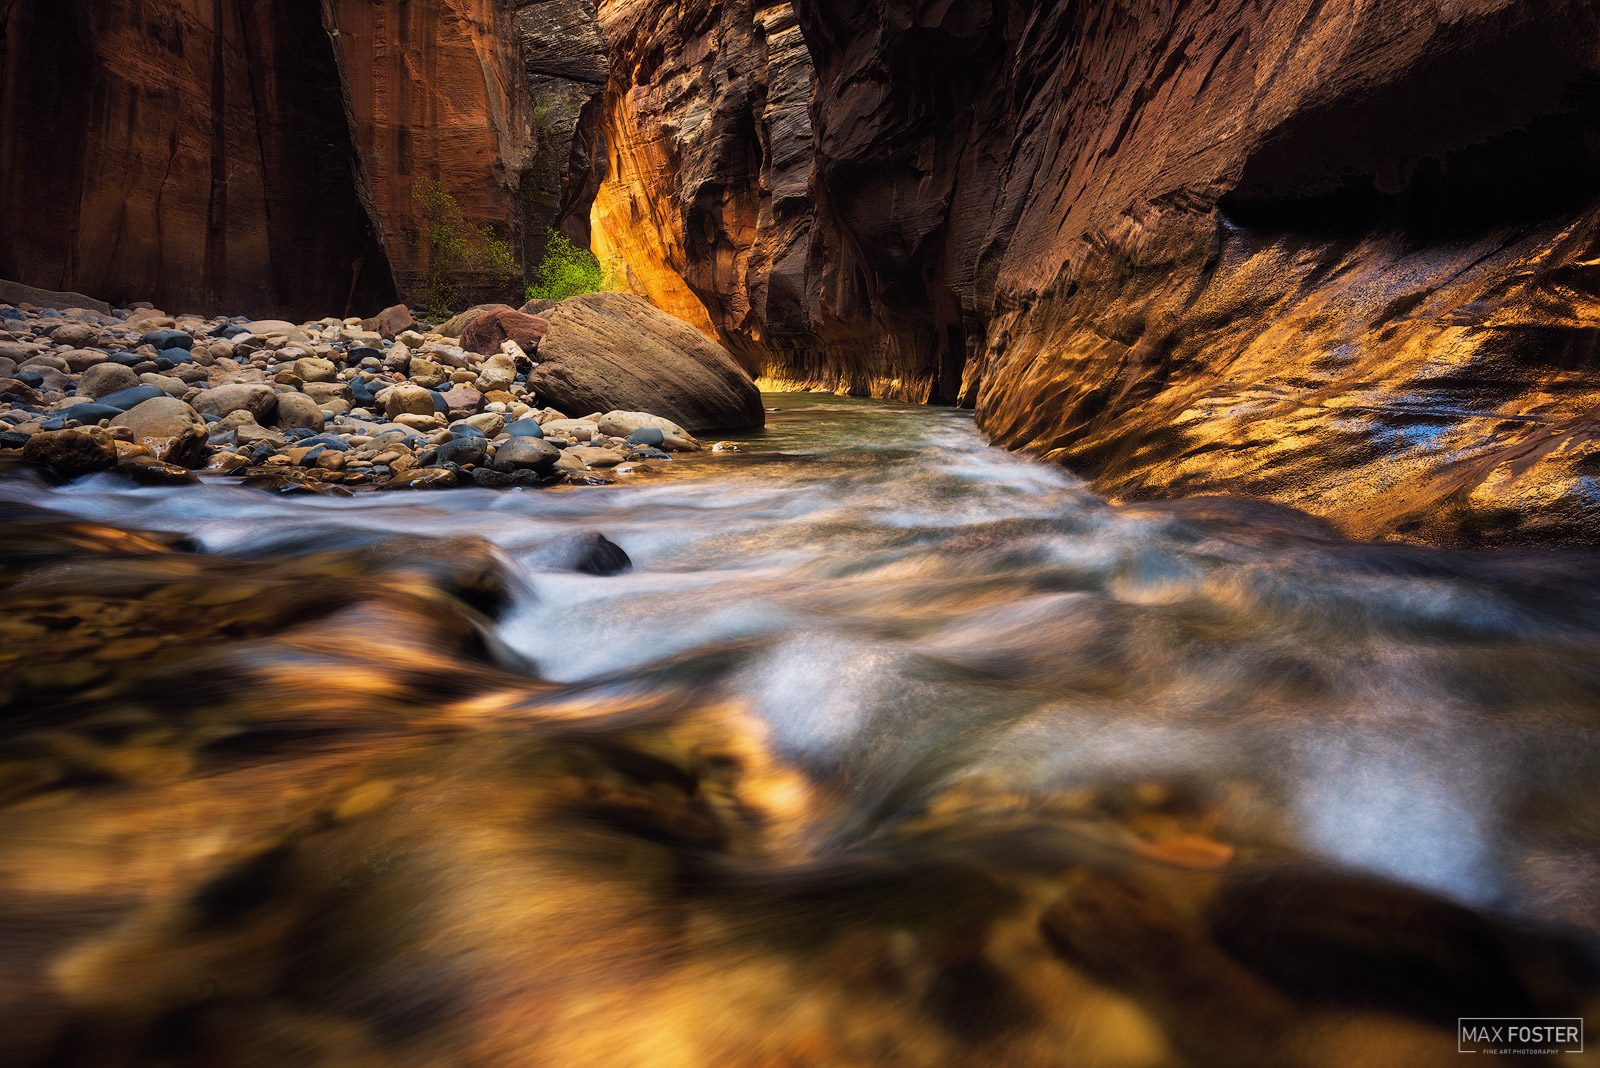 Bring your walls to life with Gold Rush, Max Foster's limited edition photography print of The Narrows in Zion National Park...